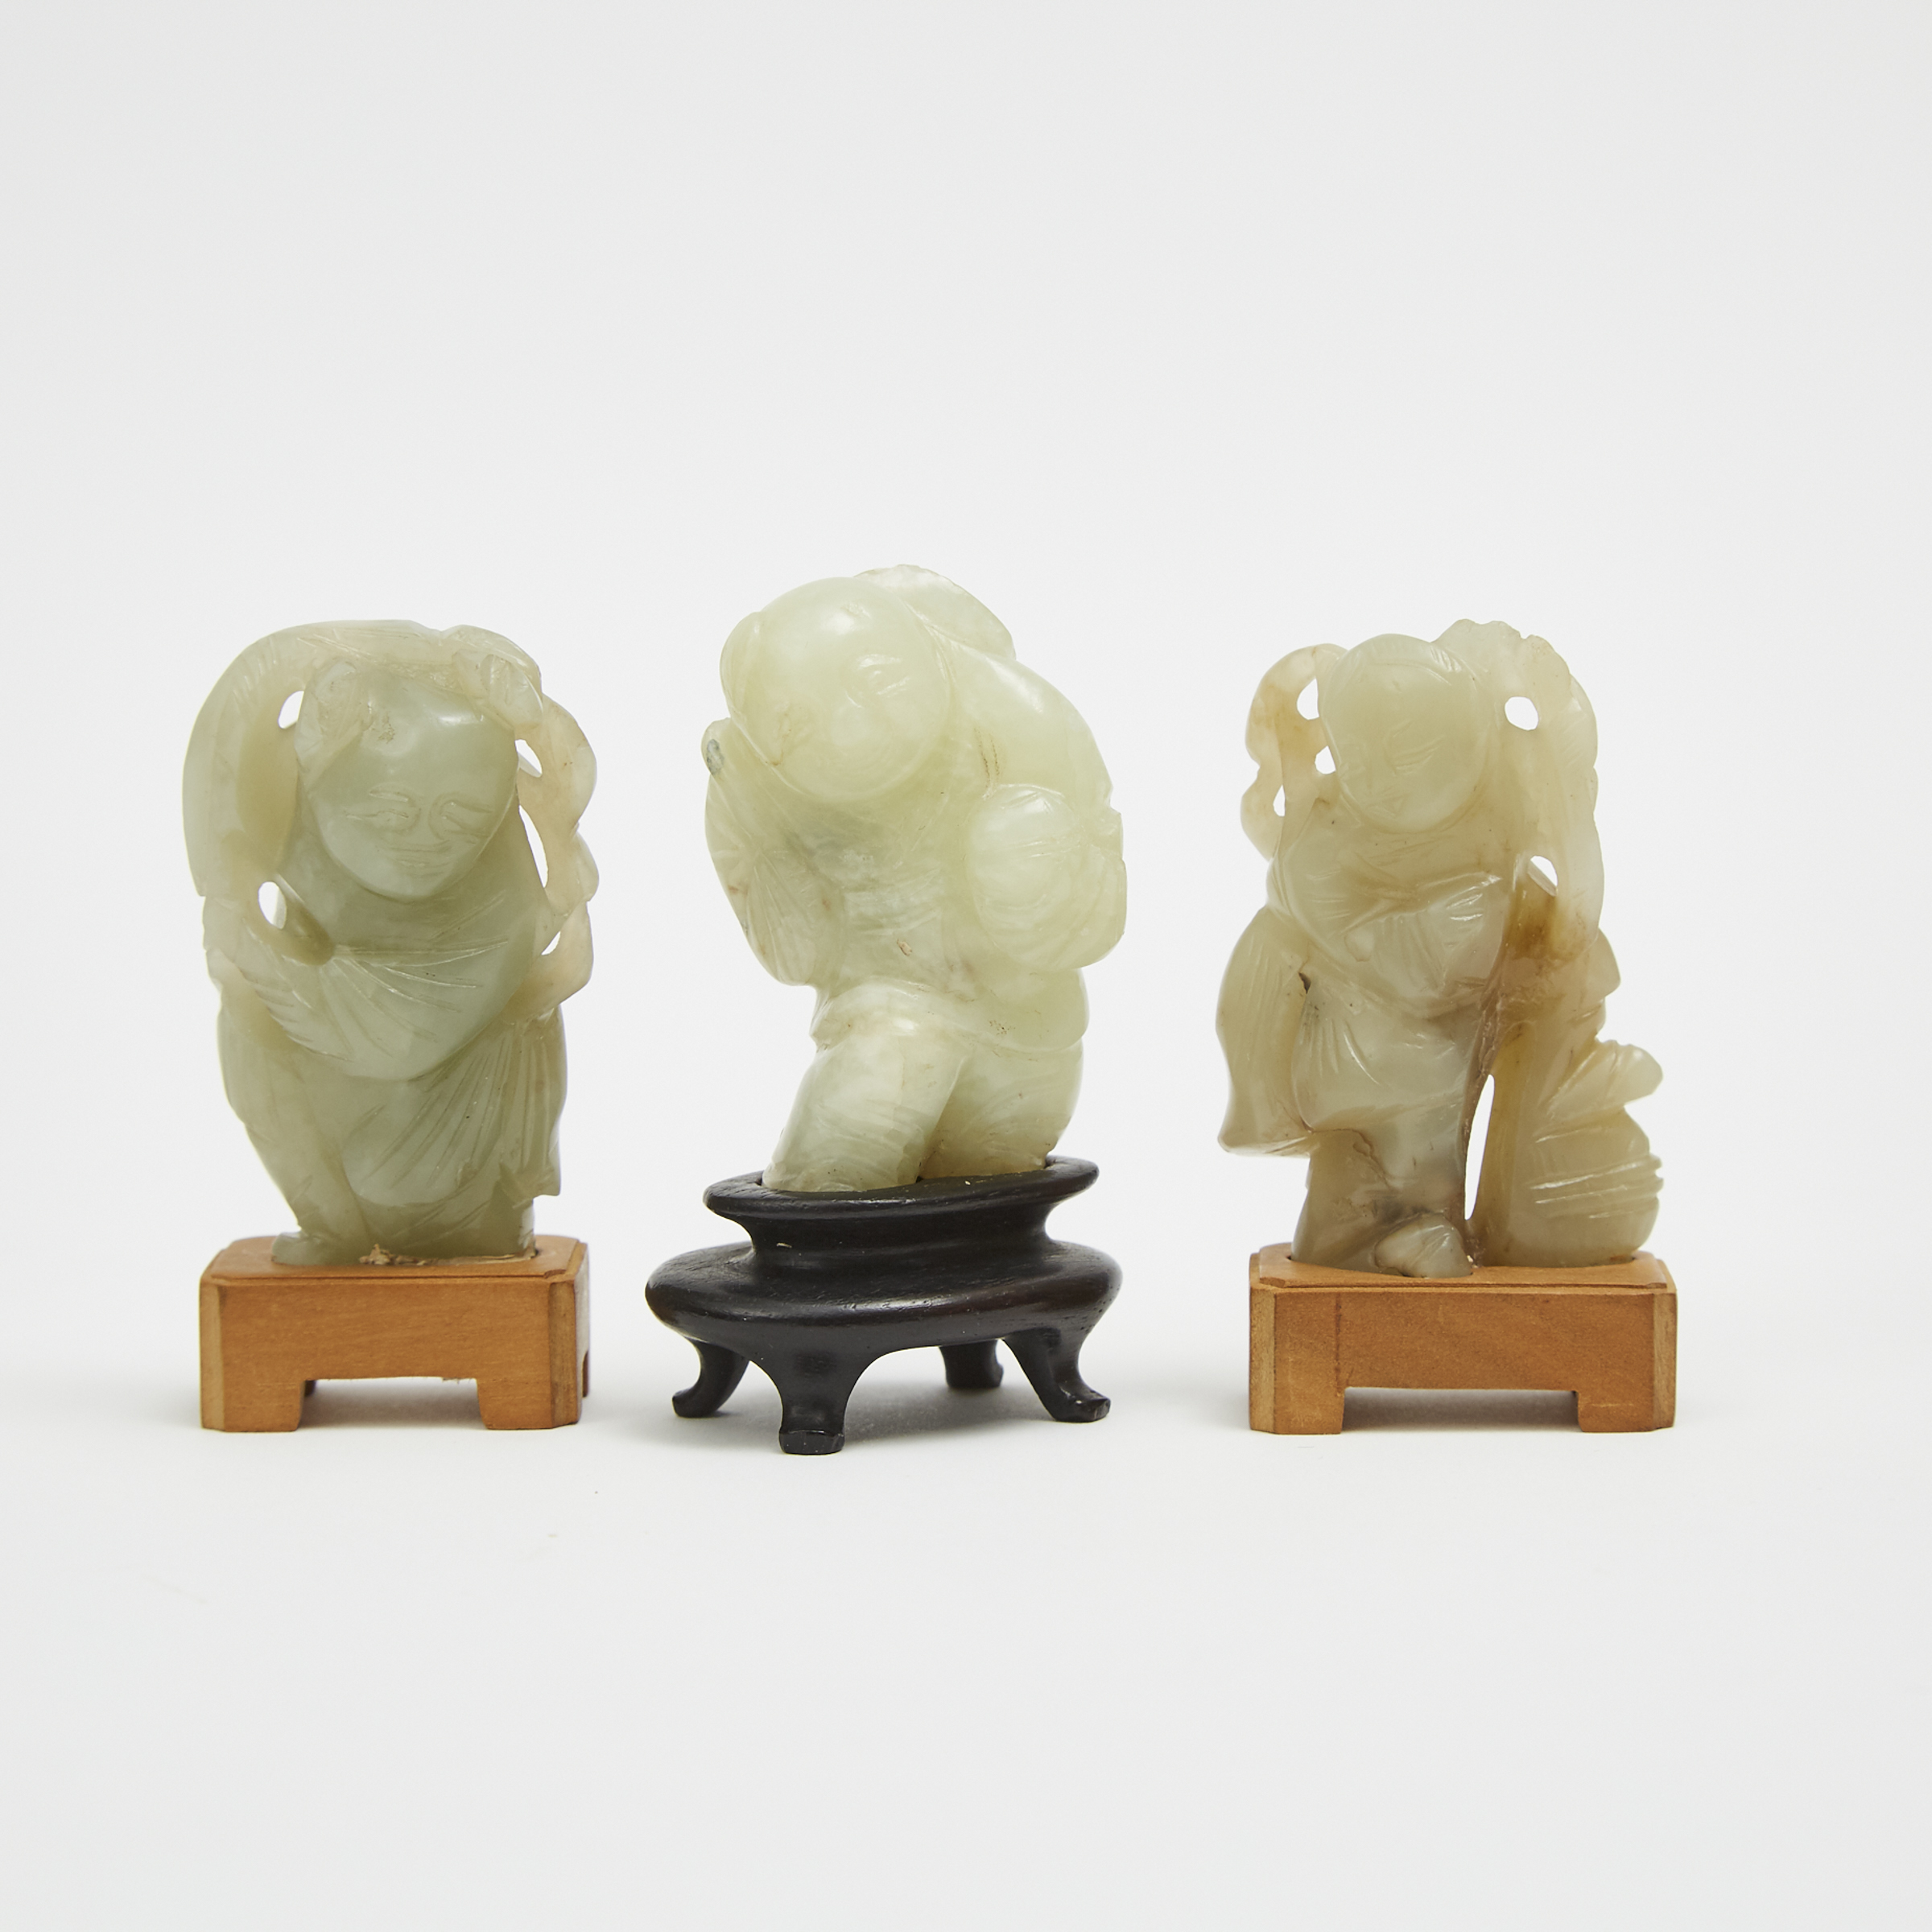 A Group of Three Jade Carved Figures